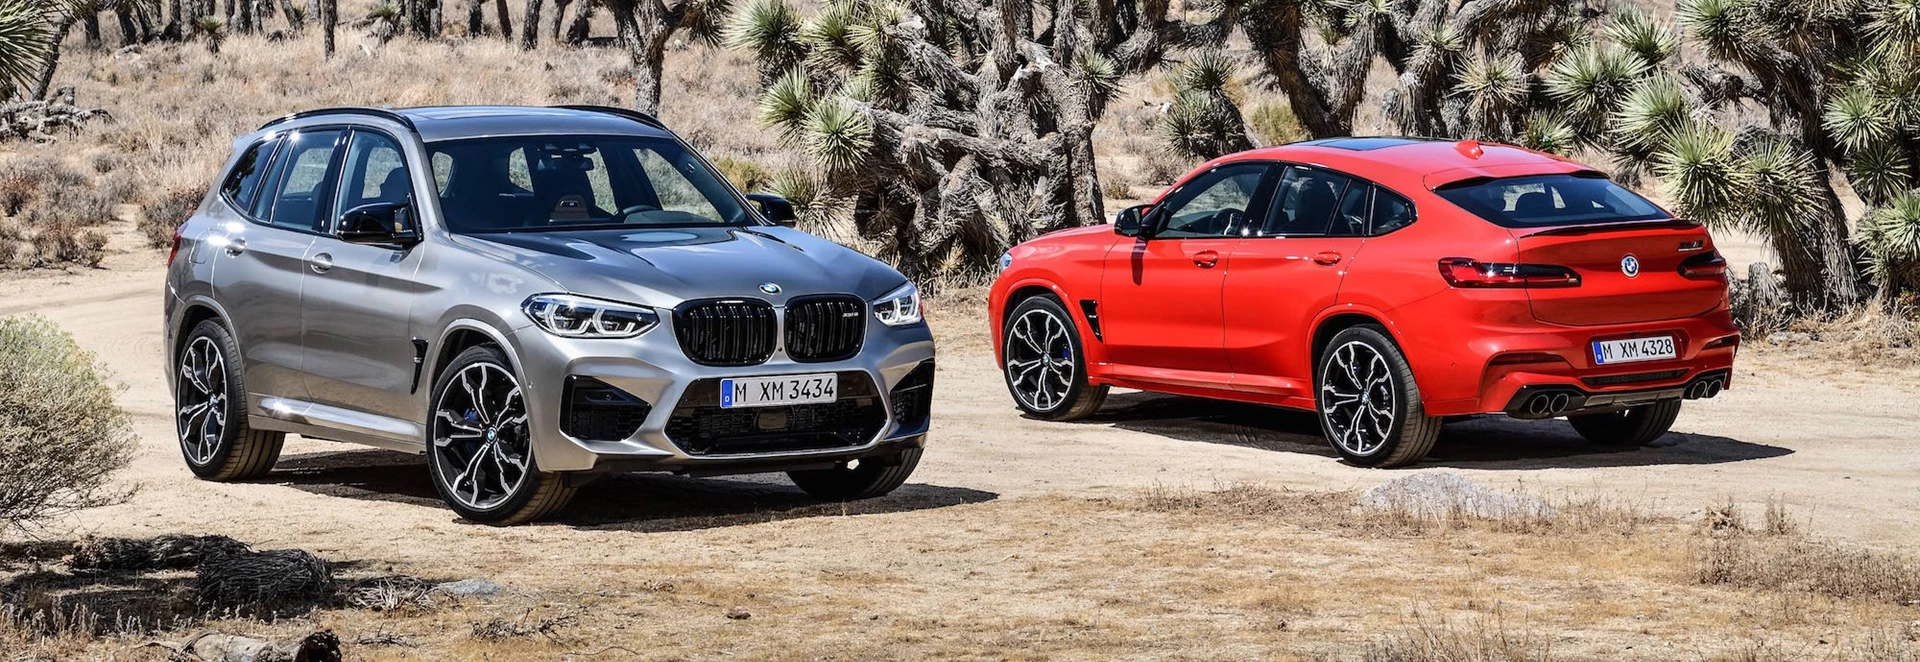 What to expect from BMW in 2019 - What is getting electrified? 